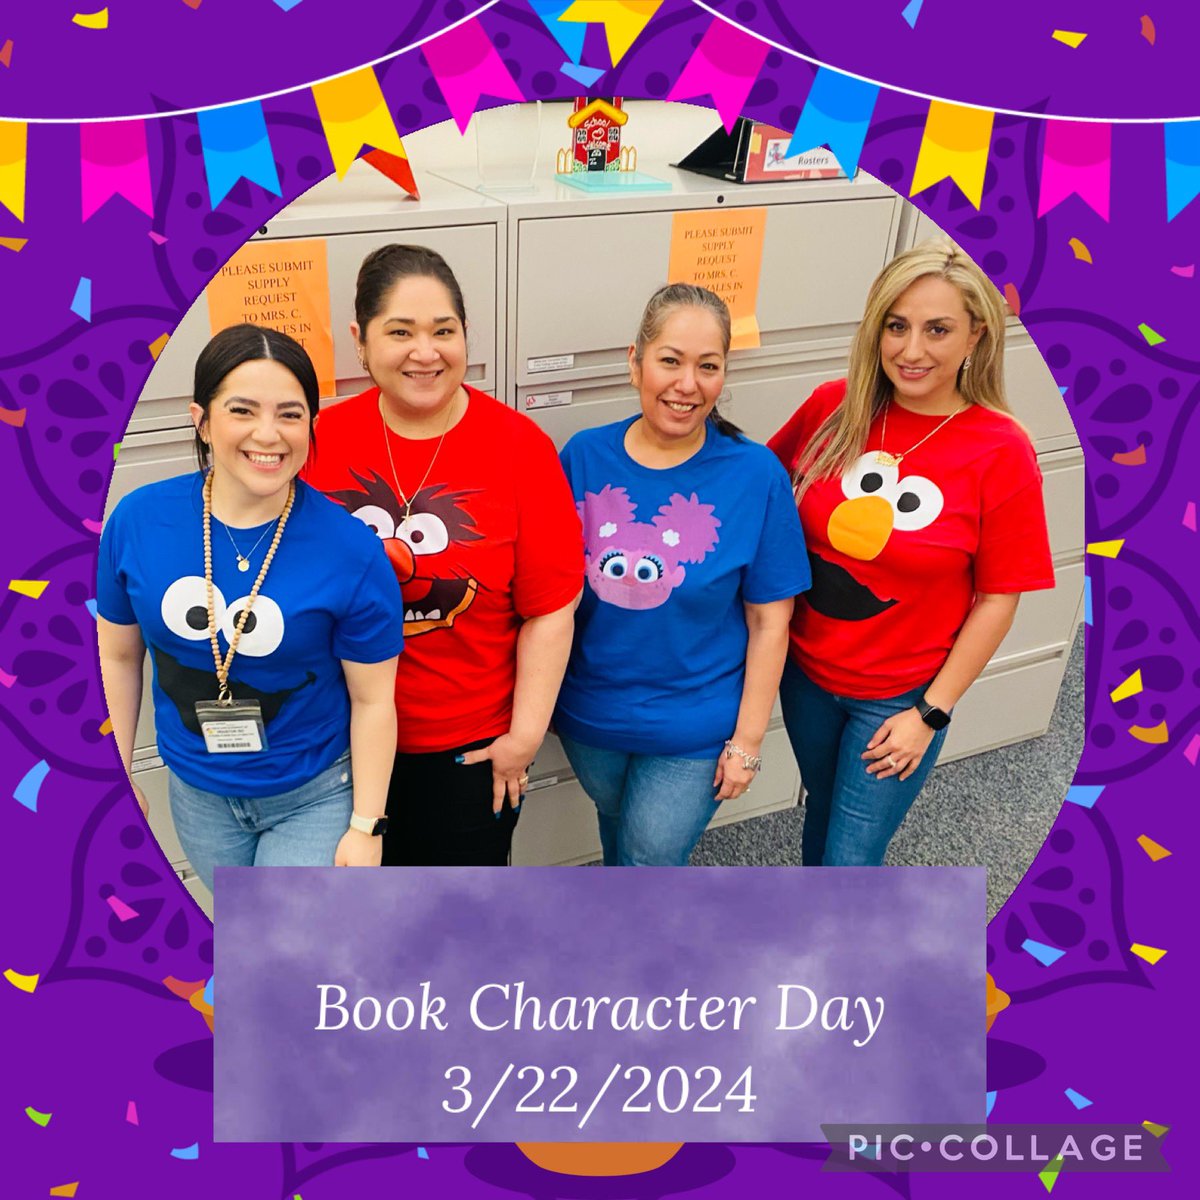 Here’s our amazing office team participating in our “Dress Like Your Favorite Book Character” day at @RuckerHISD! #SpiritWeek #TheRuckerWay ✨⭐️🌟💫